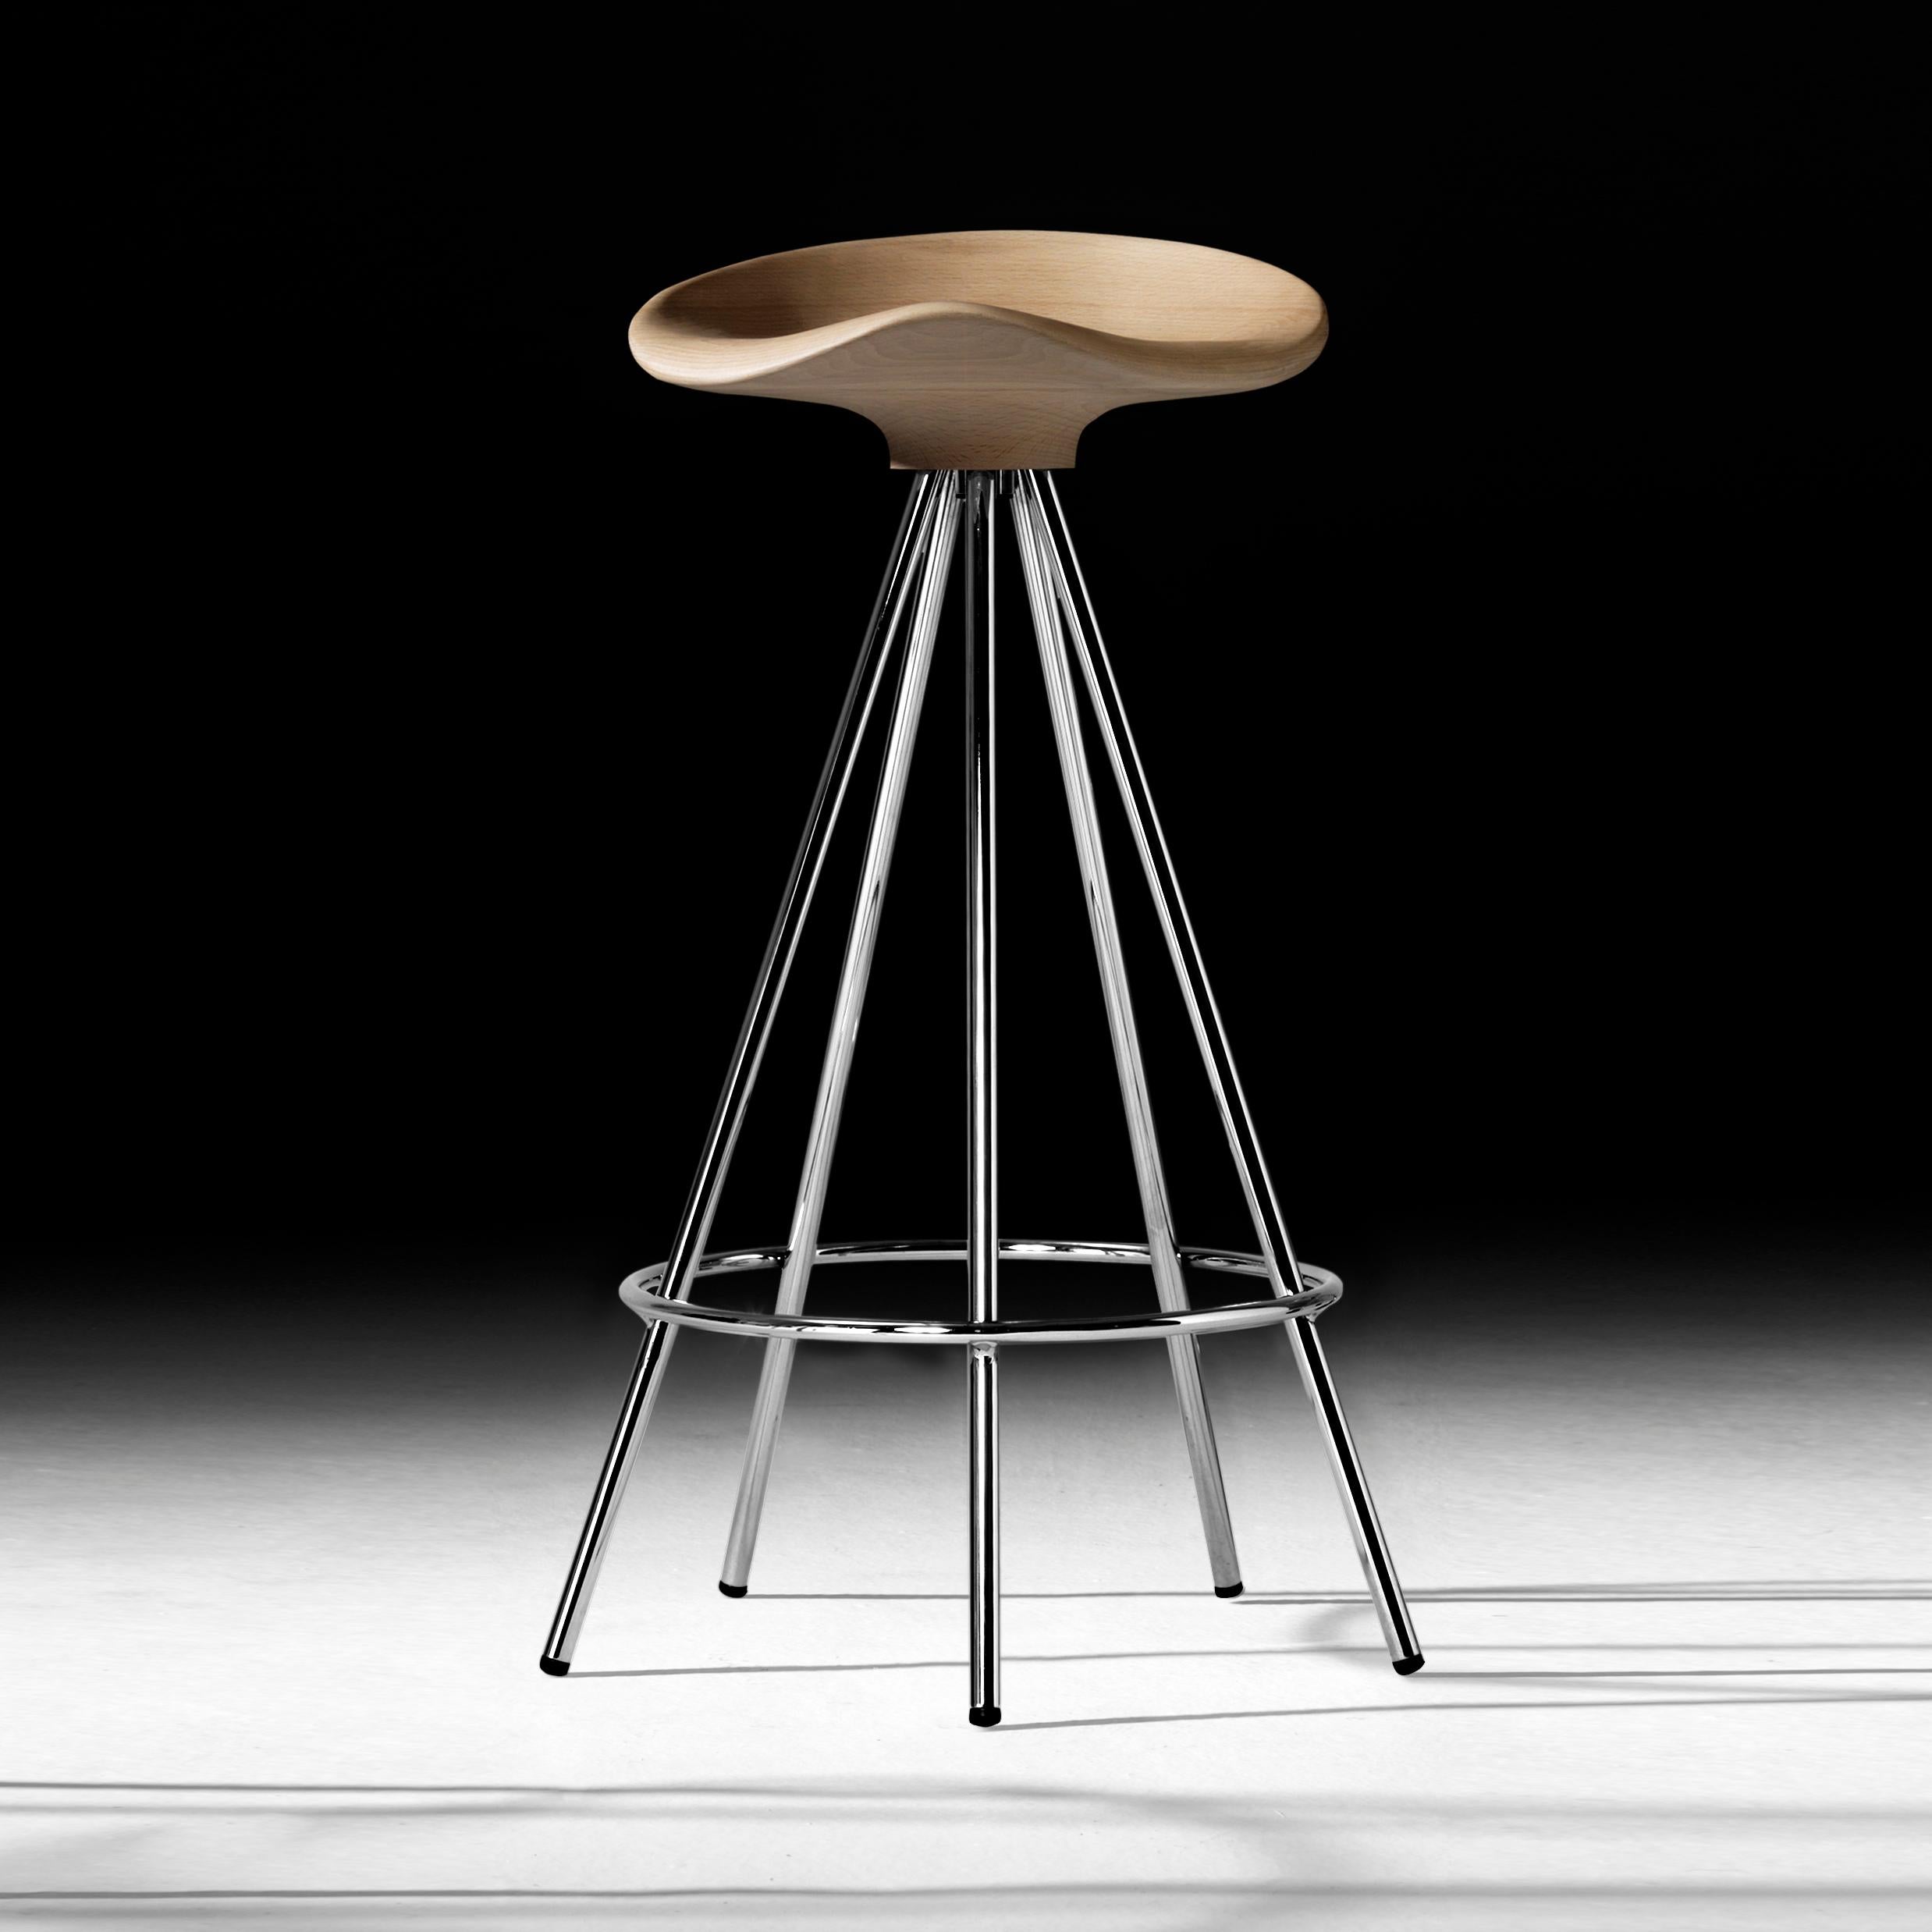 Spanish Pepe Cortes Contemporary Jamaica Steel Wood Stool for BD Barcelona ENVIOS